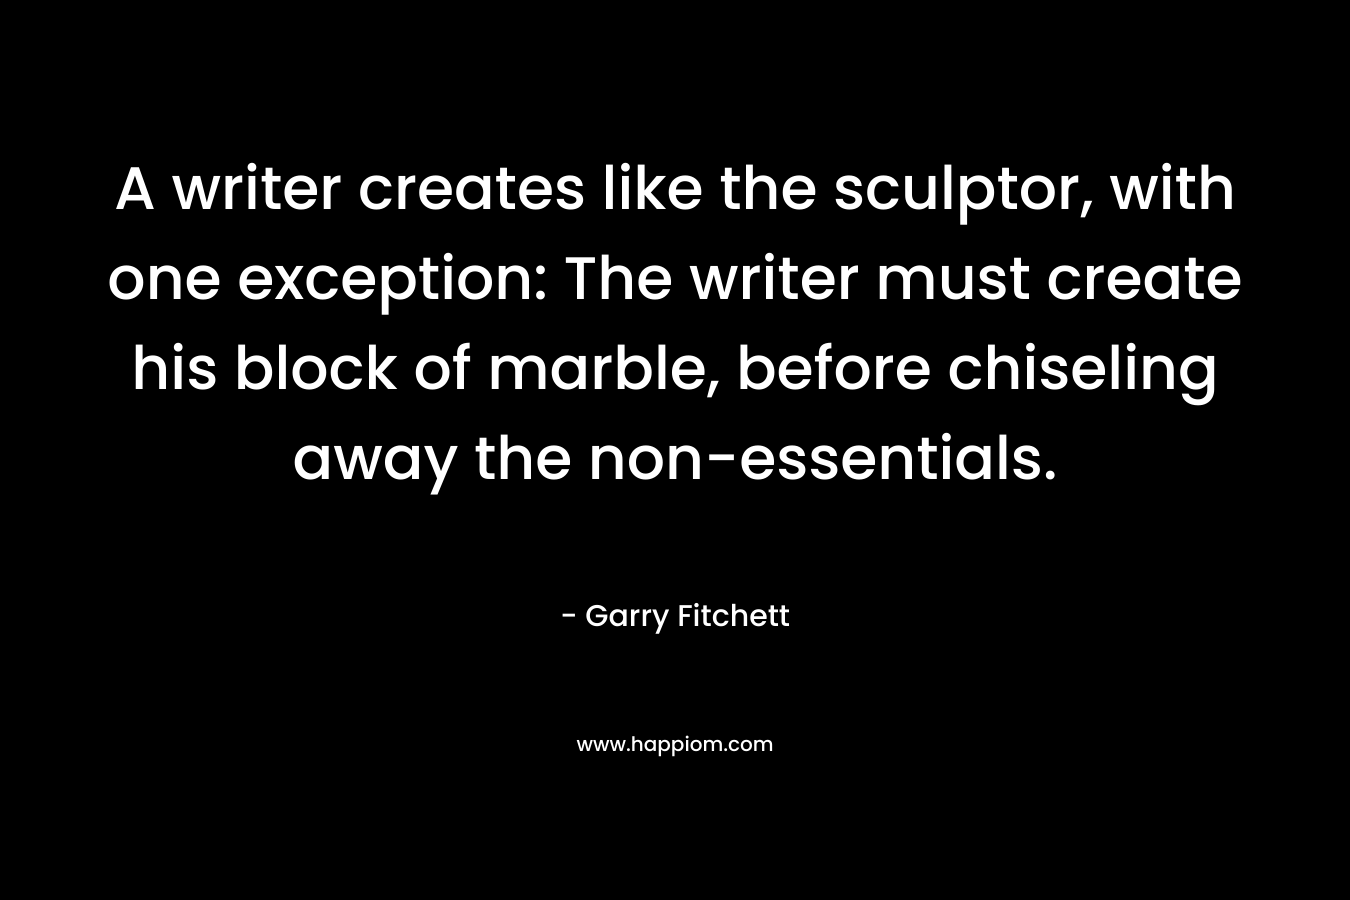 A writer creates like the sculptor, with one exception: The writer must create his block of marble, before chiseling away the non-essentials. – Garry Fitchett